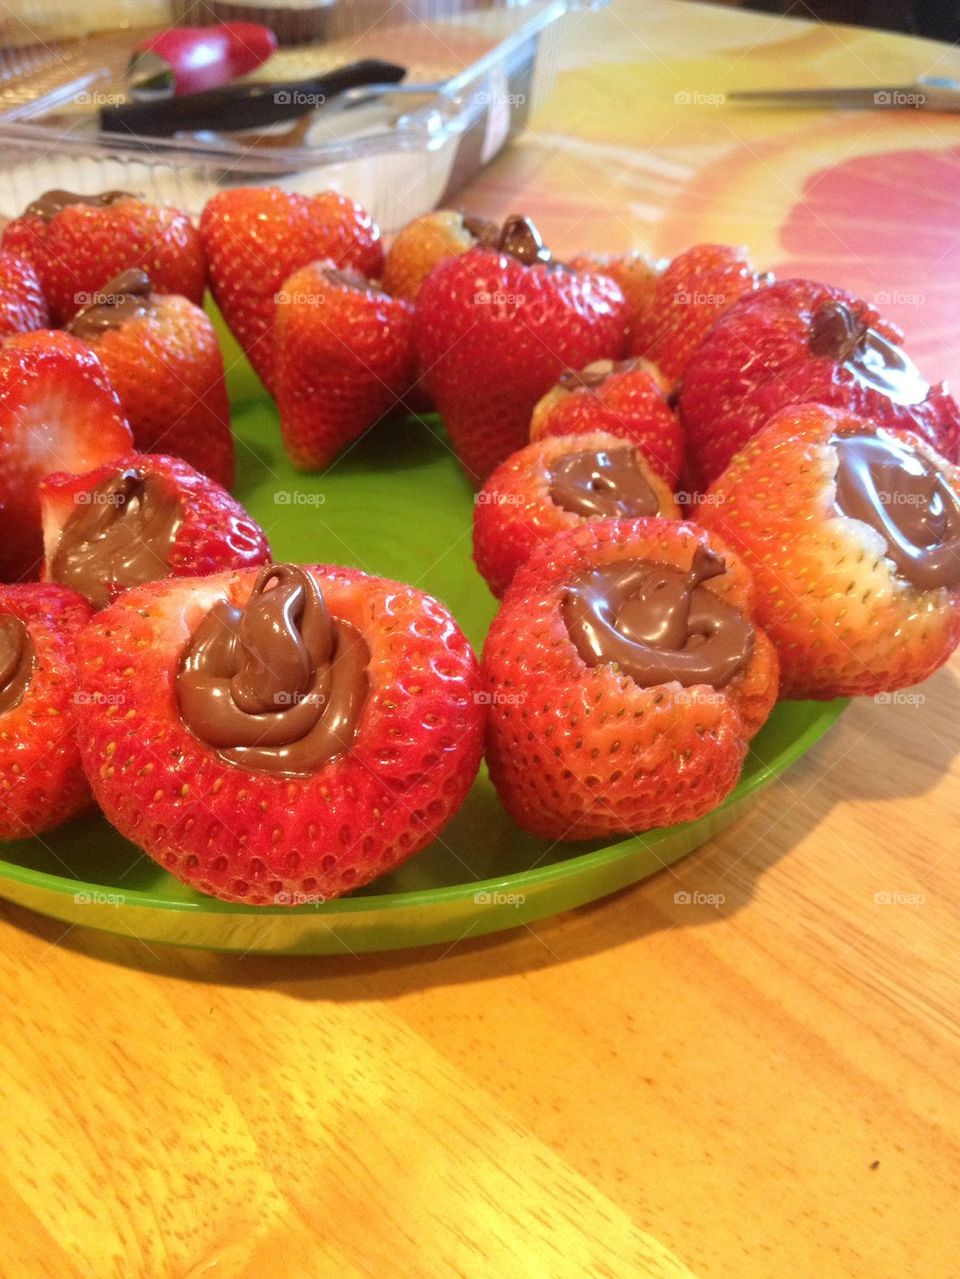 Nutellaberries